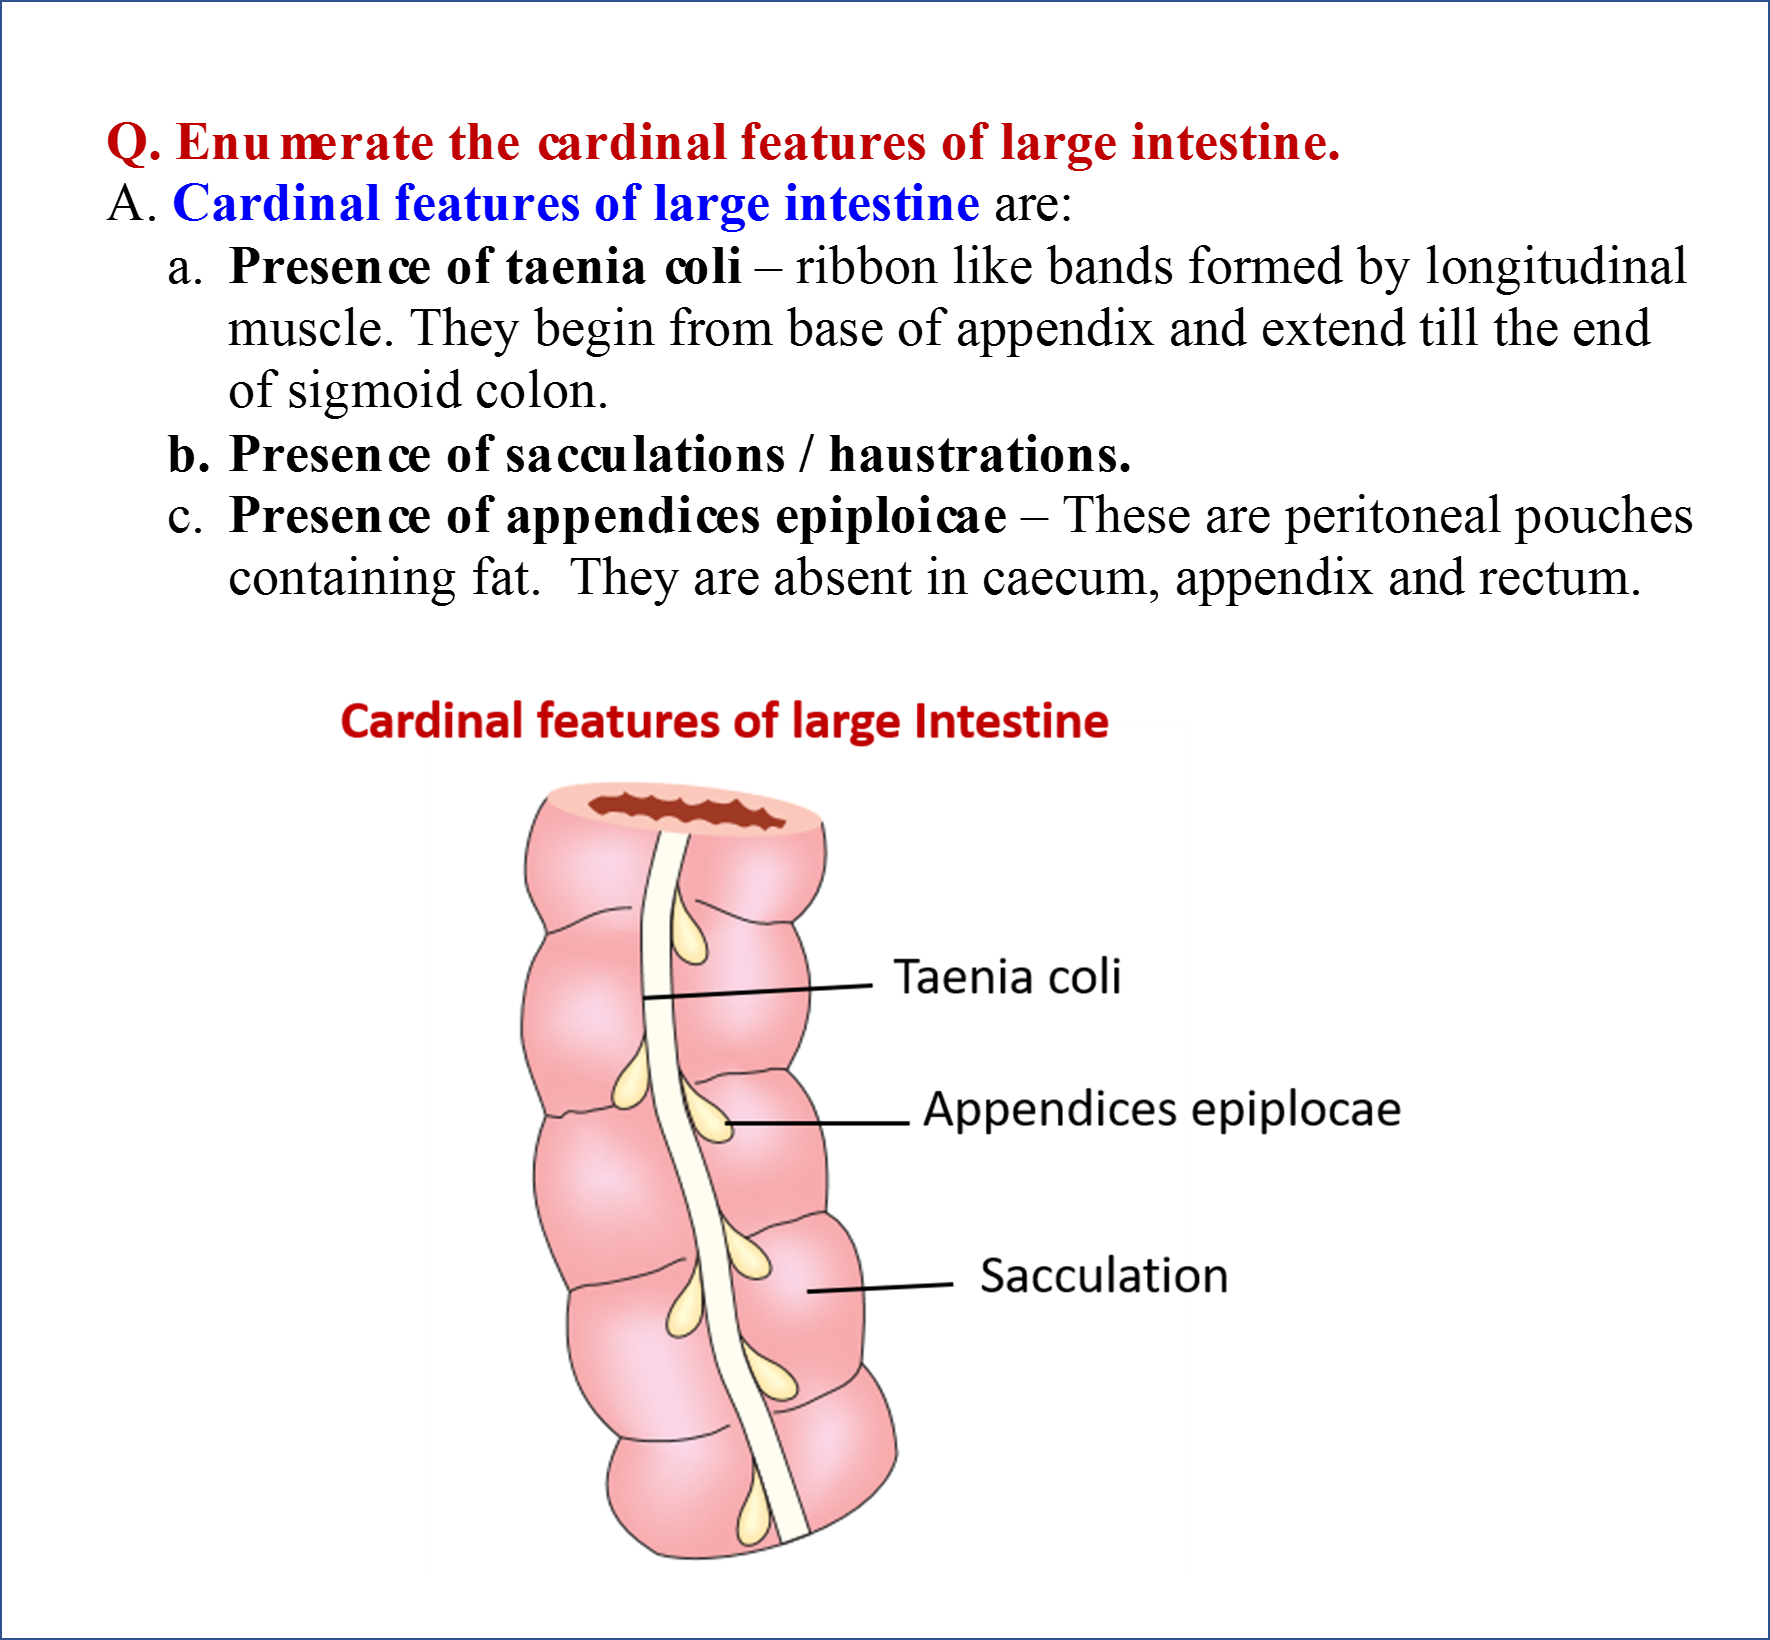 Cardinal Features of Large Intestine